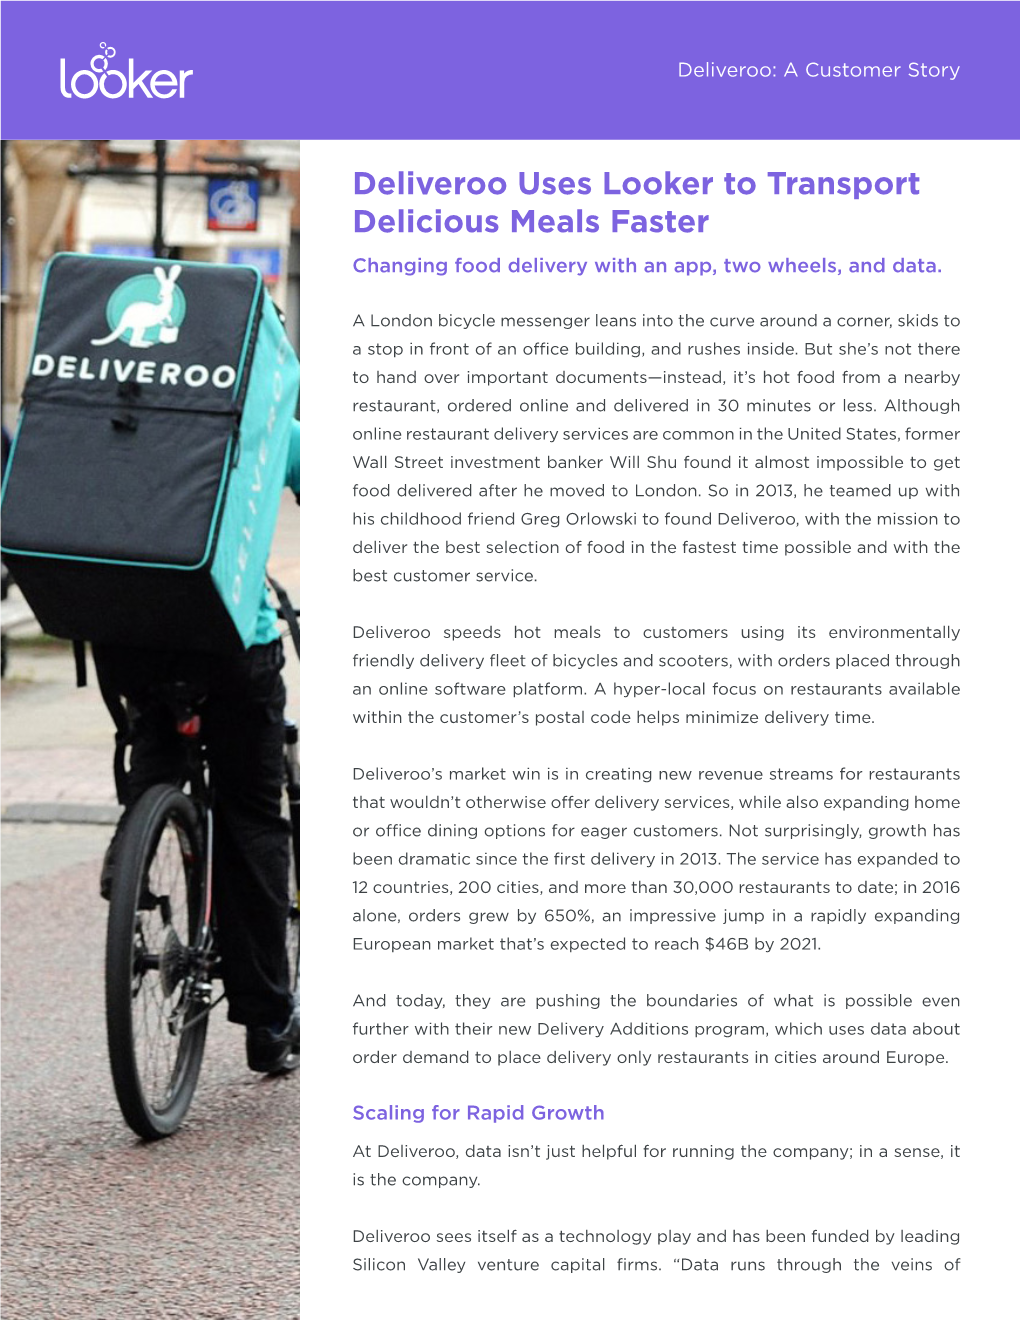 Deliveroo Uses Looker to Transport Delicious Meals Faster Changing Food Delivery with an App, Two Wheels, and Data